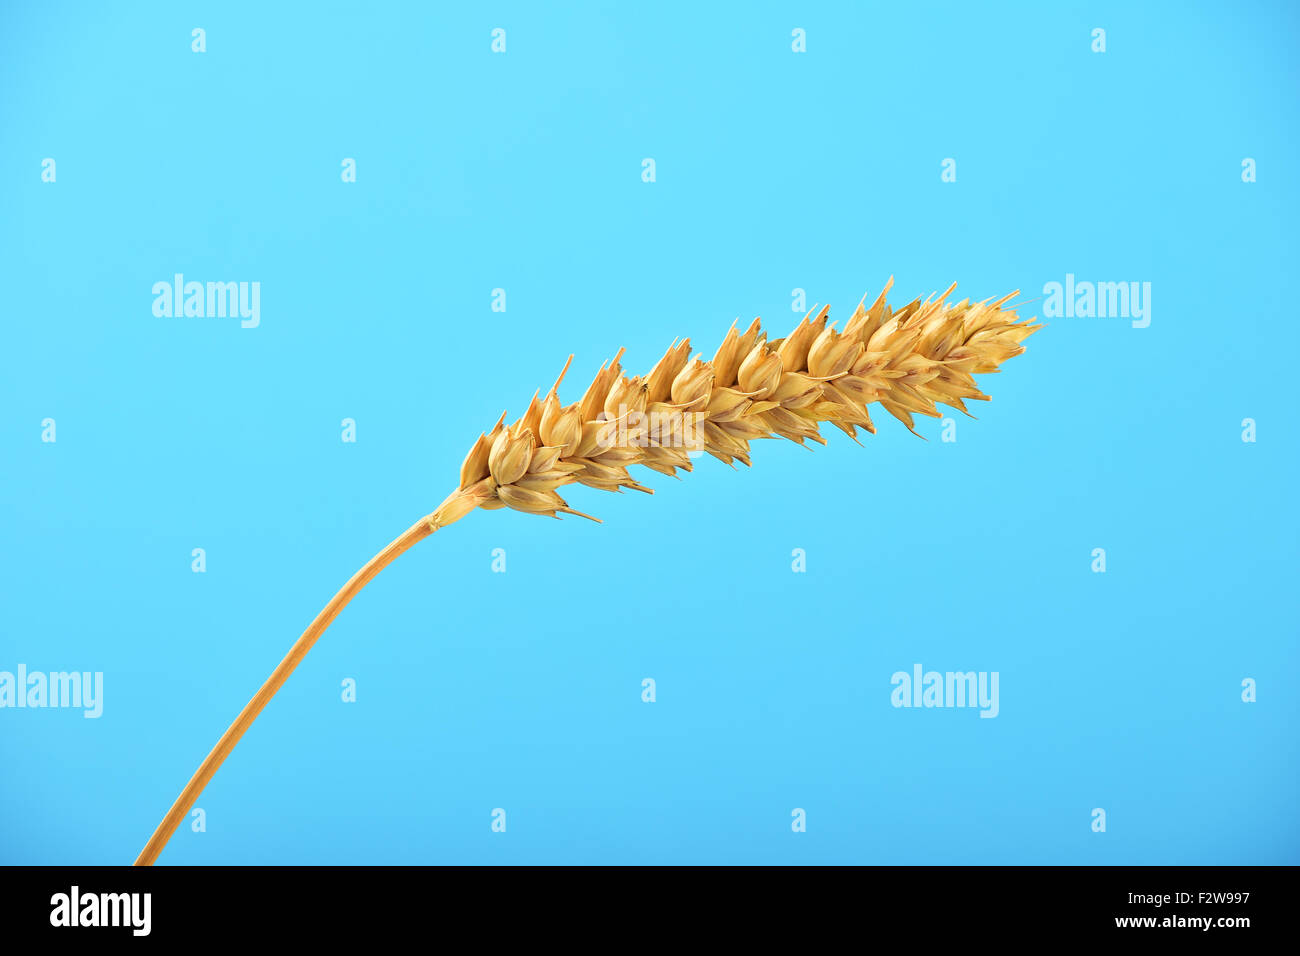 One wheat ripe ear spike bending under clear blue sky without clouds Stock Photo